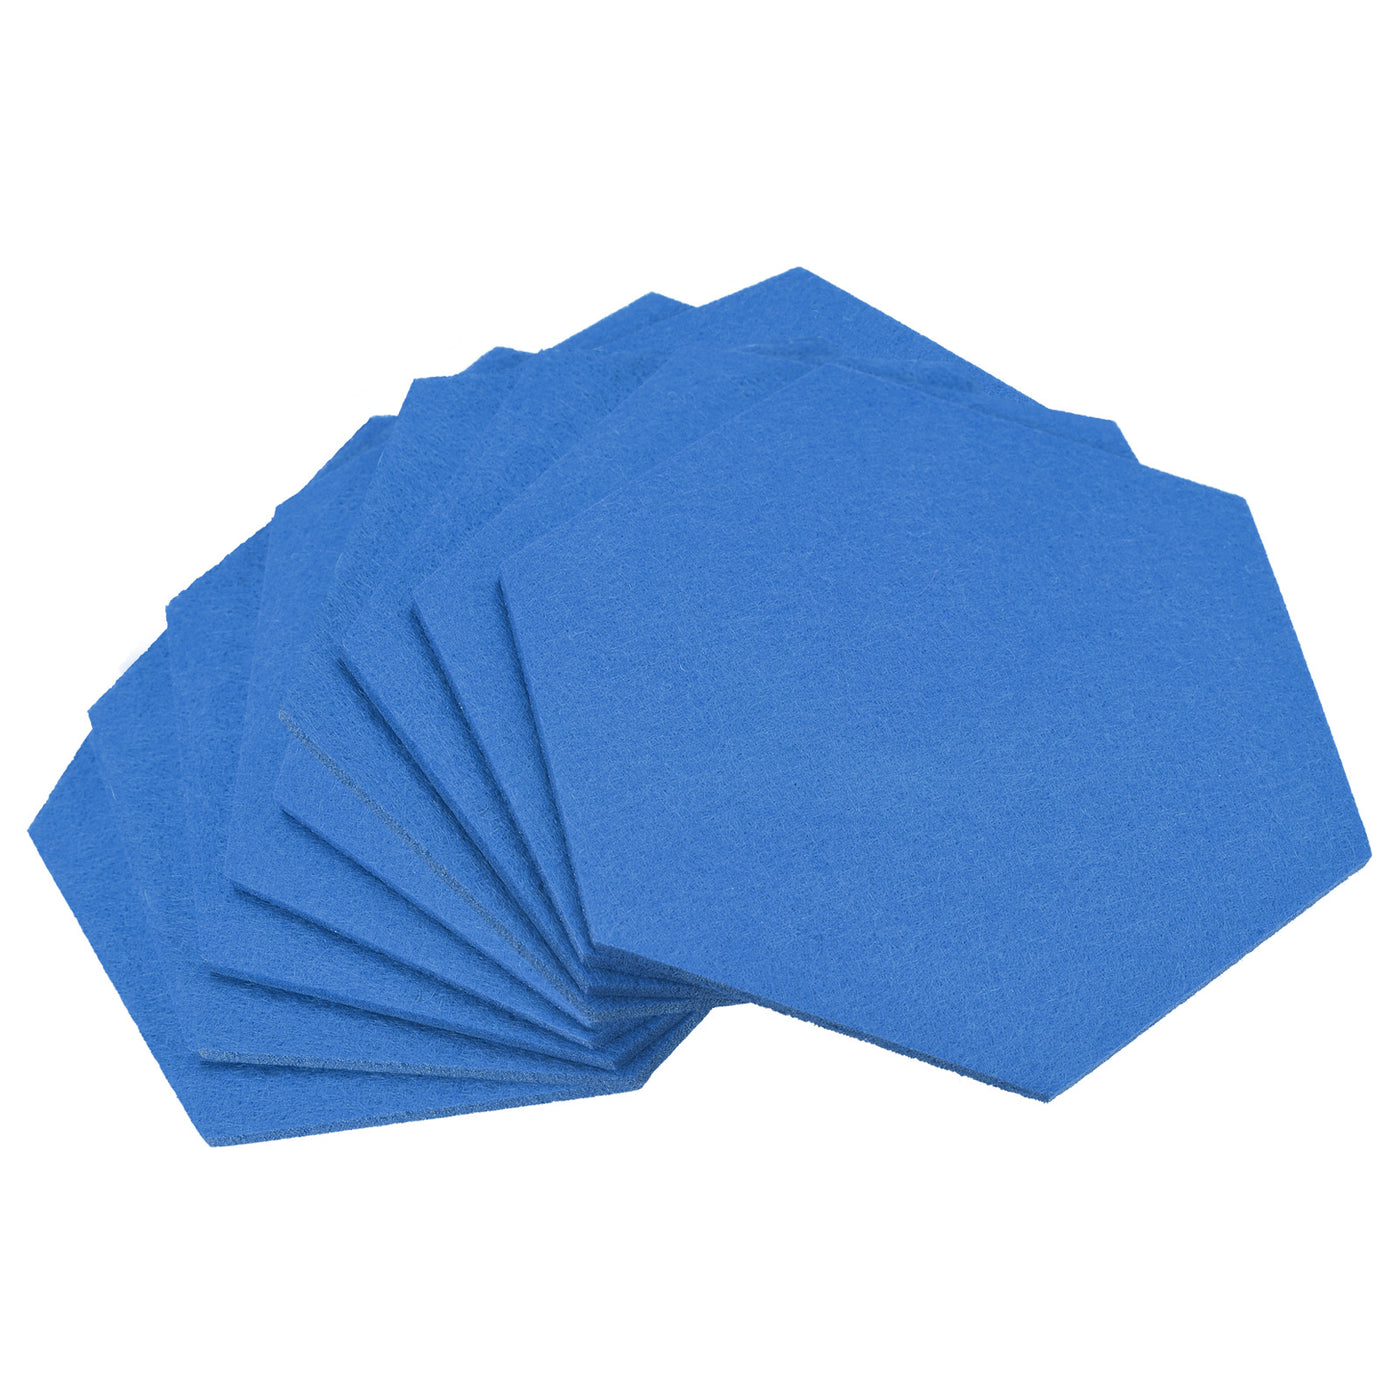 uxcell Uxcell Felt Coasters 9pcs Absorbent Pad Coaster for Drink Cup Pot Bowl Vase Sky Blue